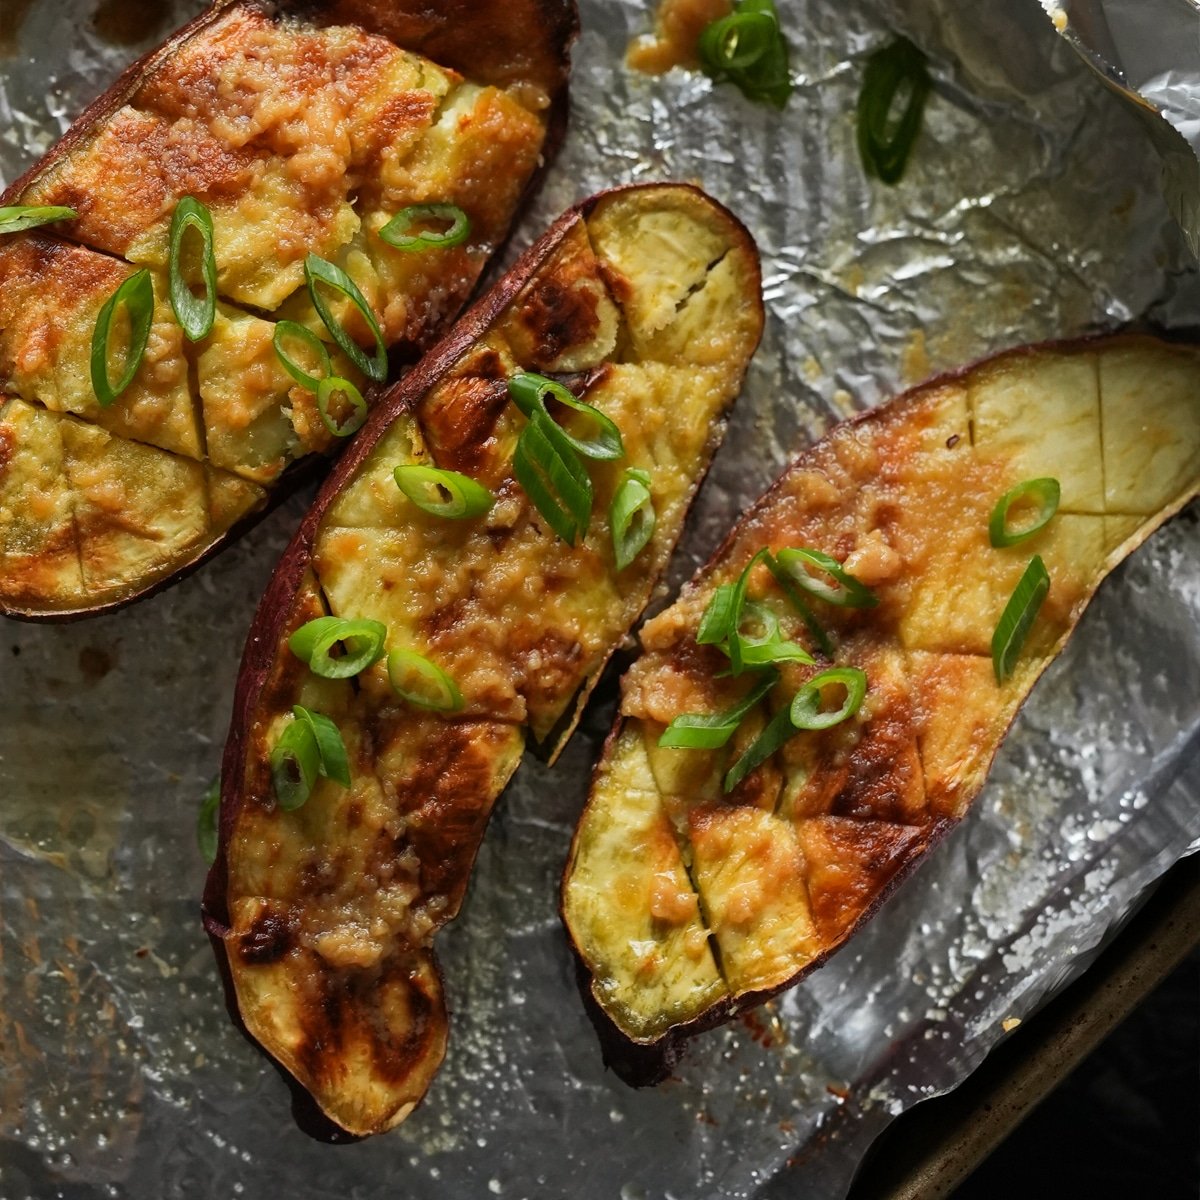 Roasted miso butter Japanese sweet potatoes turned into a resistant starch